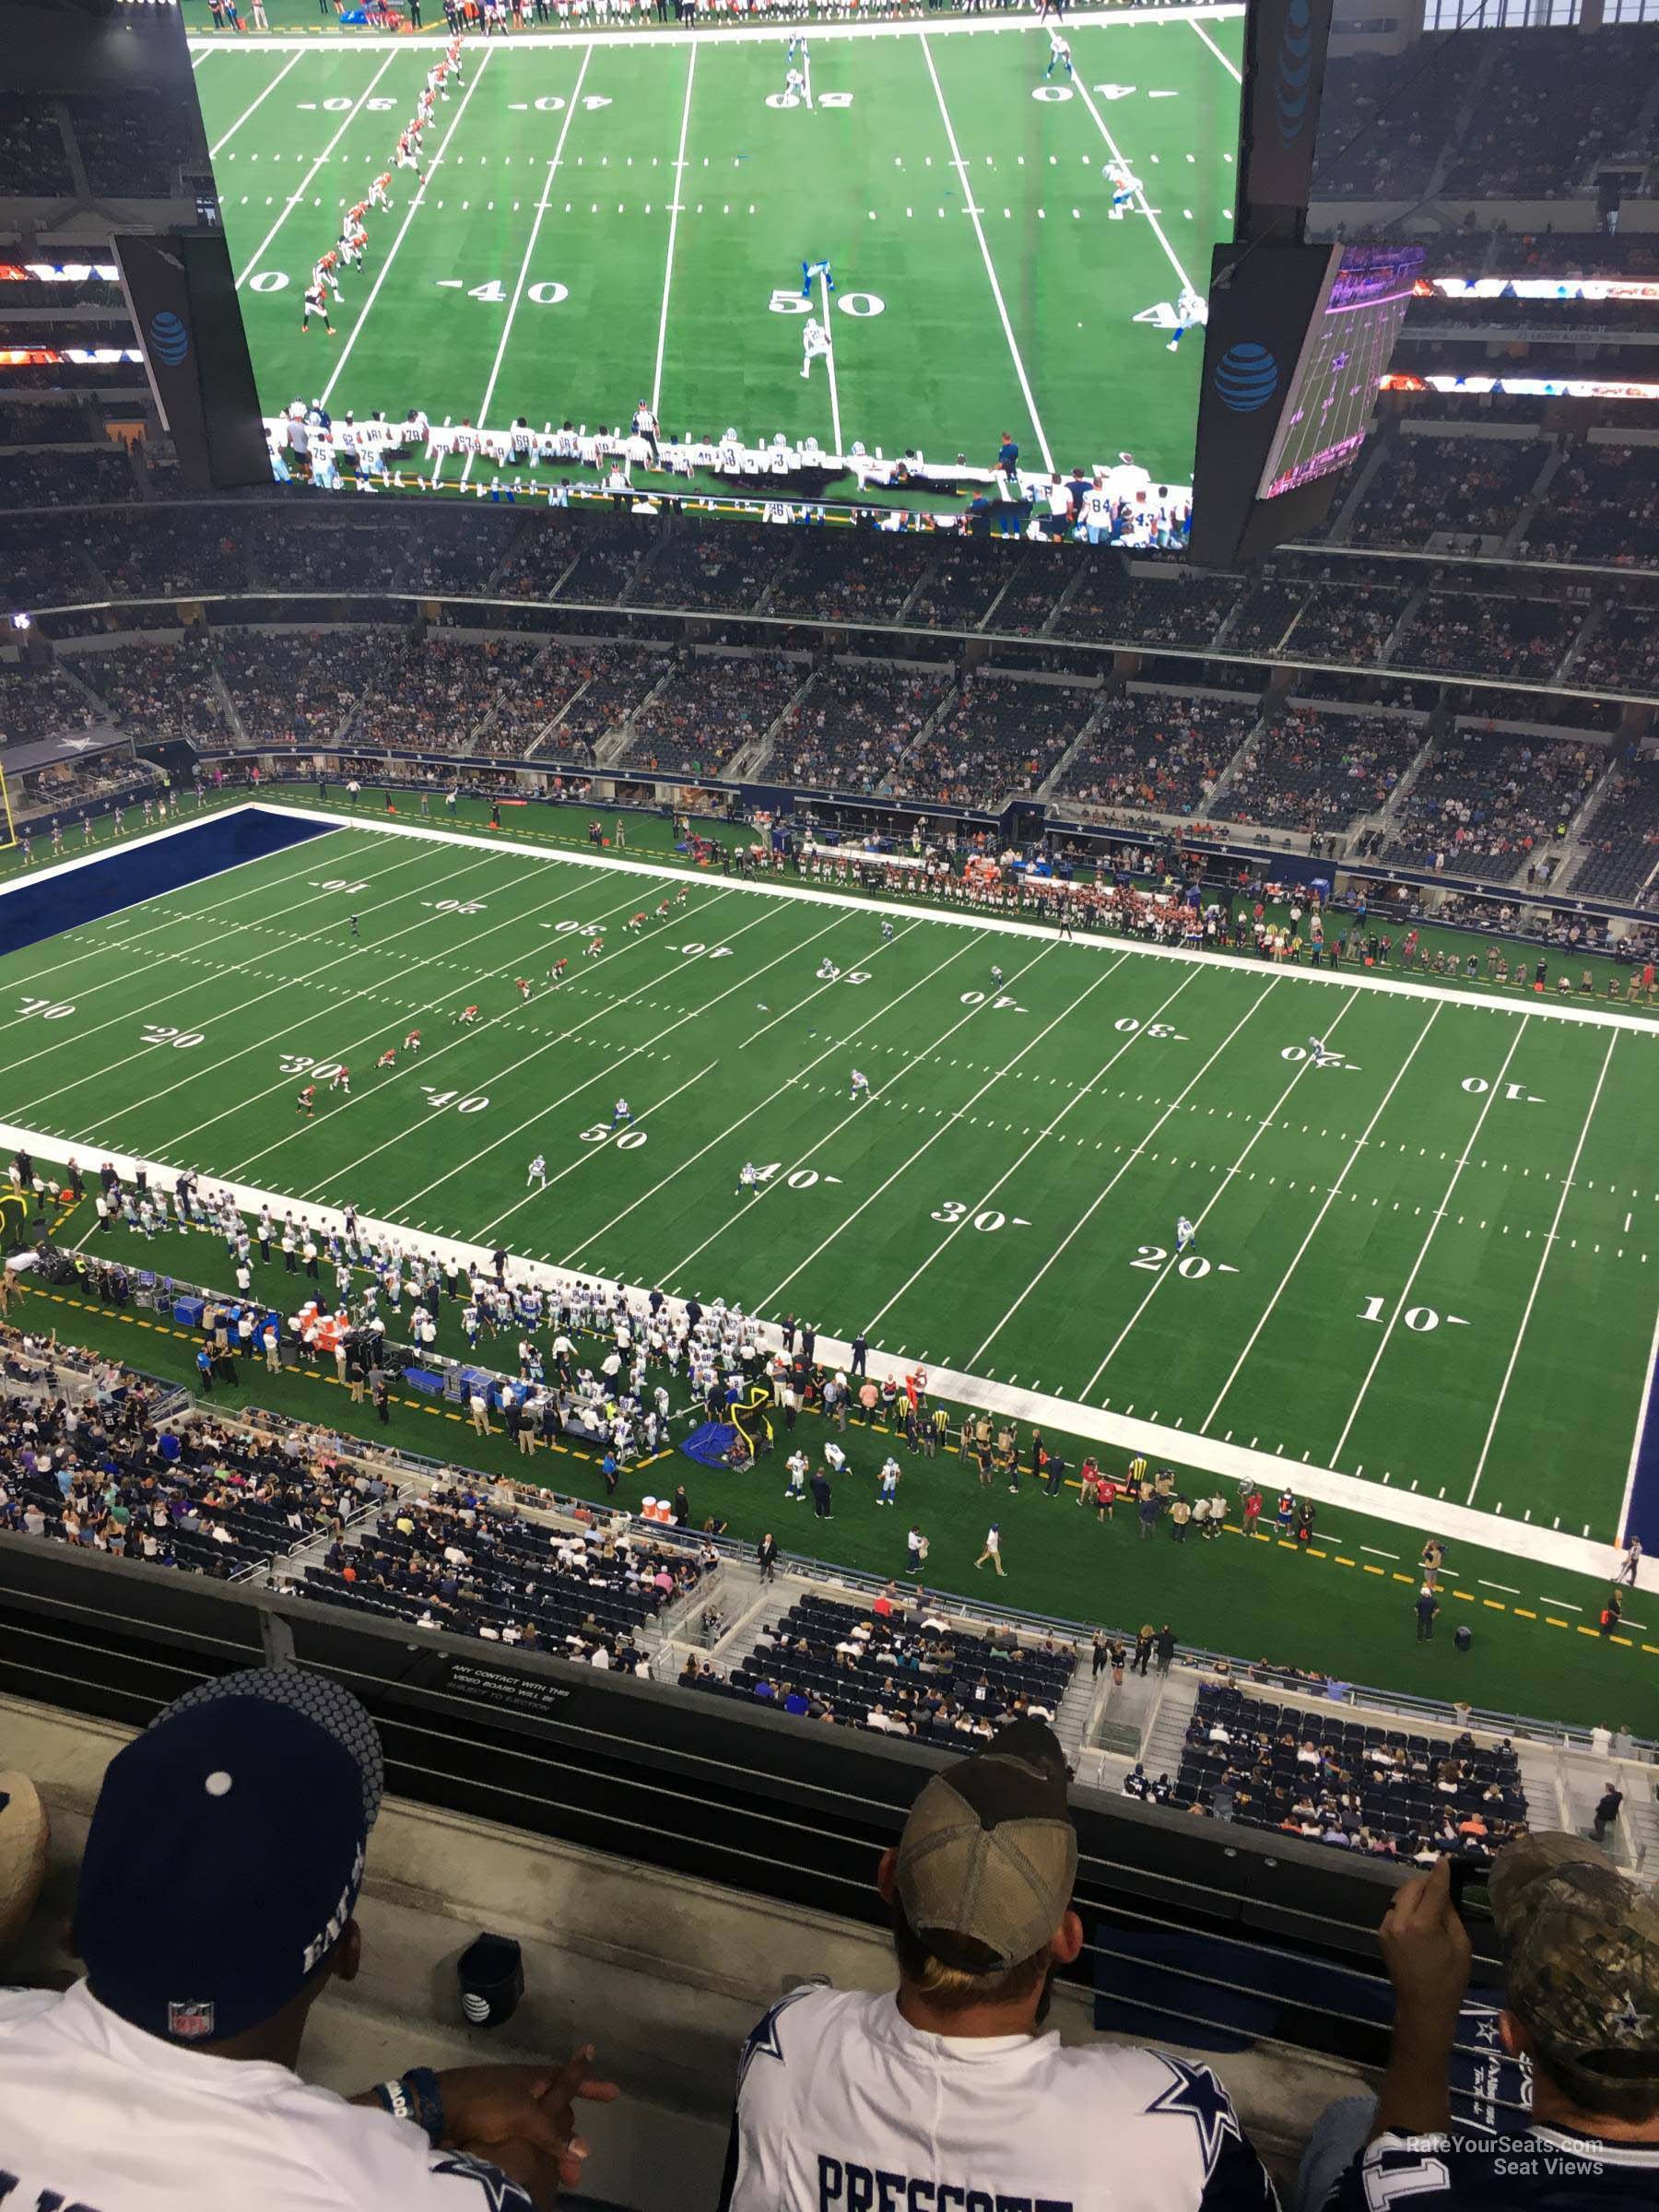 section 406, row 4 seat view  for football - at&t stadium (cowboys stadium)